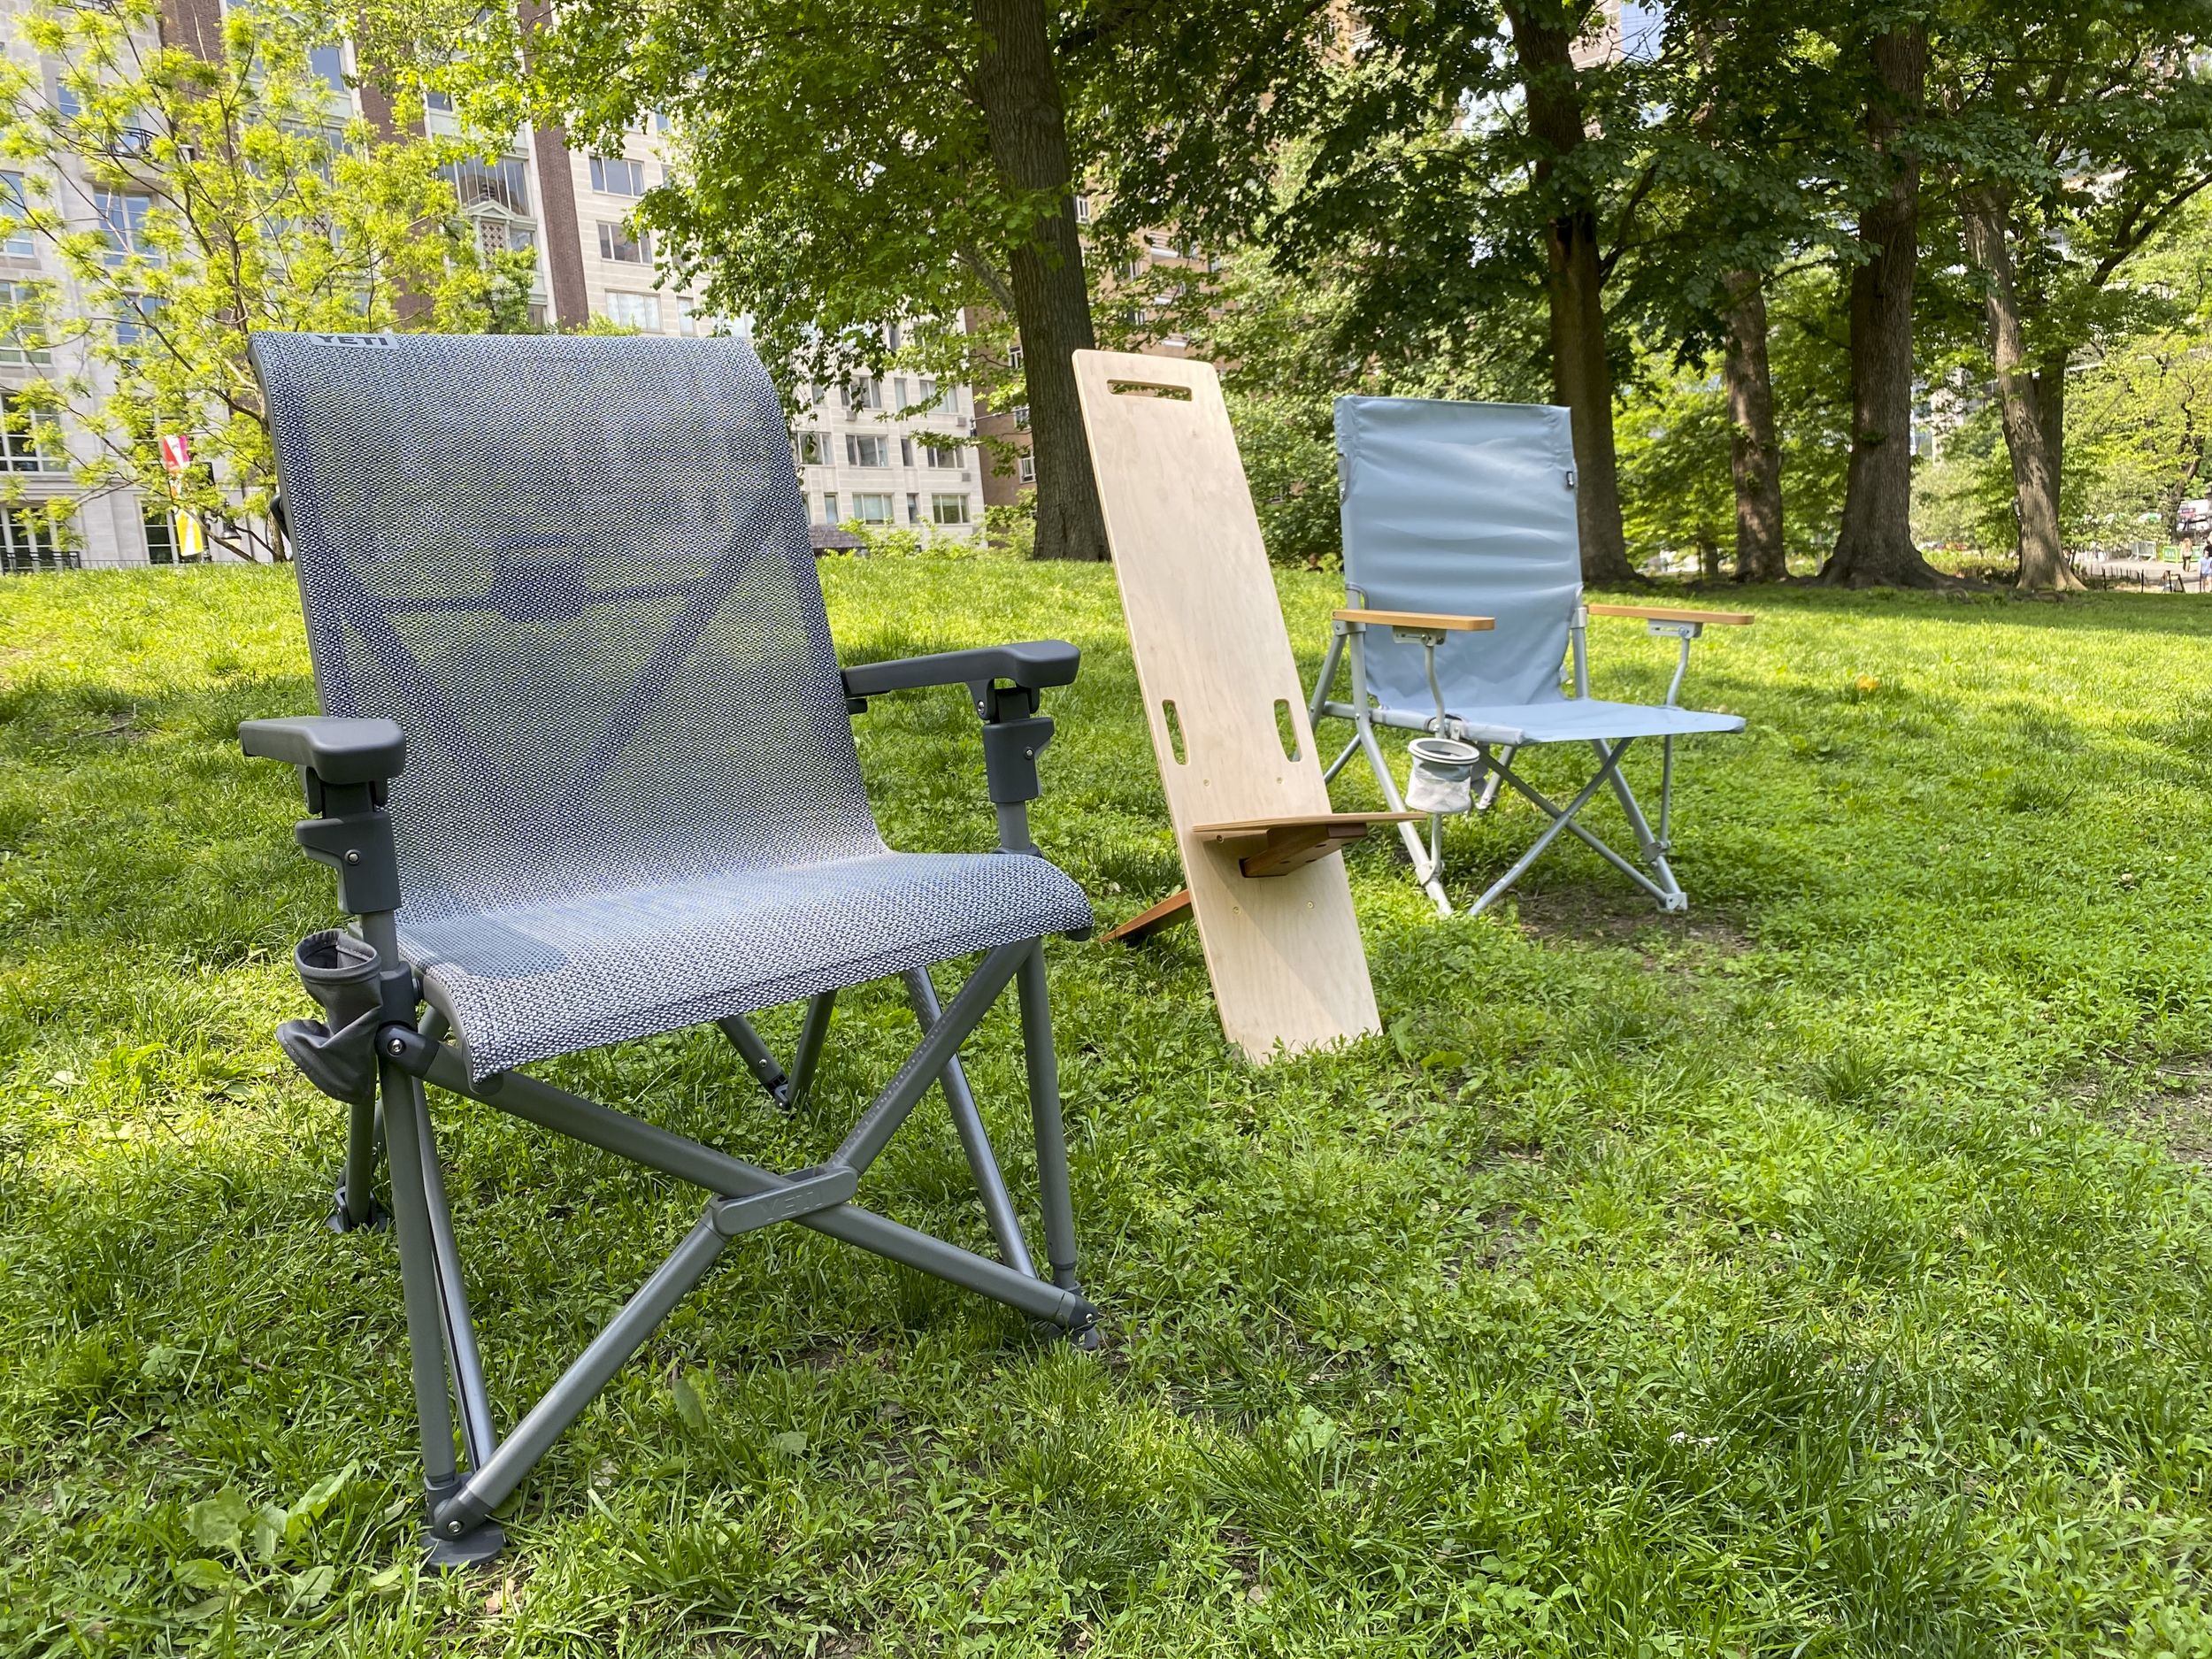 6 Essential Features to Look for in a Quality Folding Chair